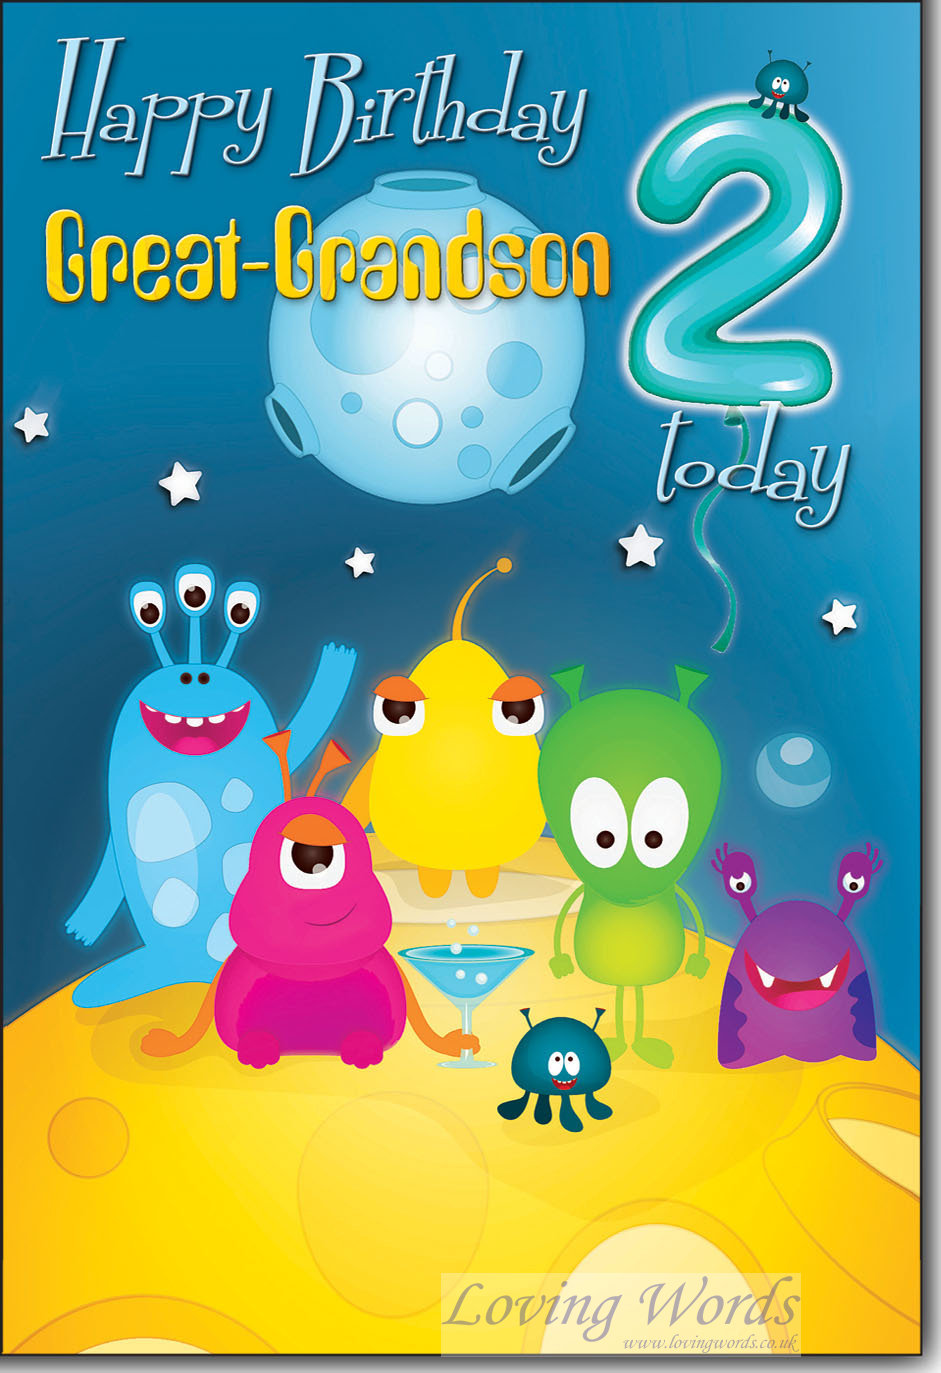 For Great-Grandson 2 Today | Greeting Cards by Loving Words